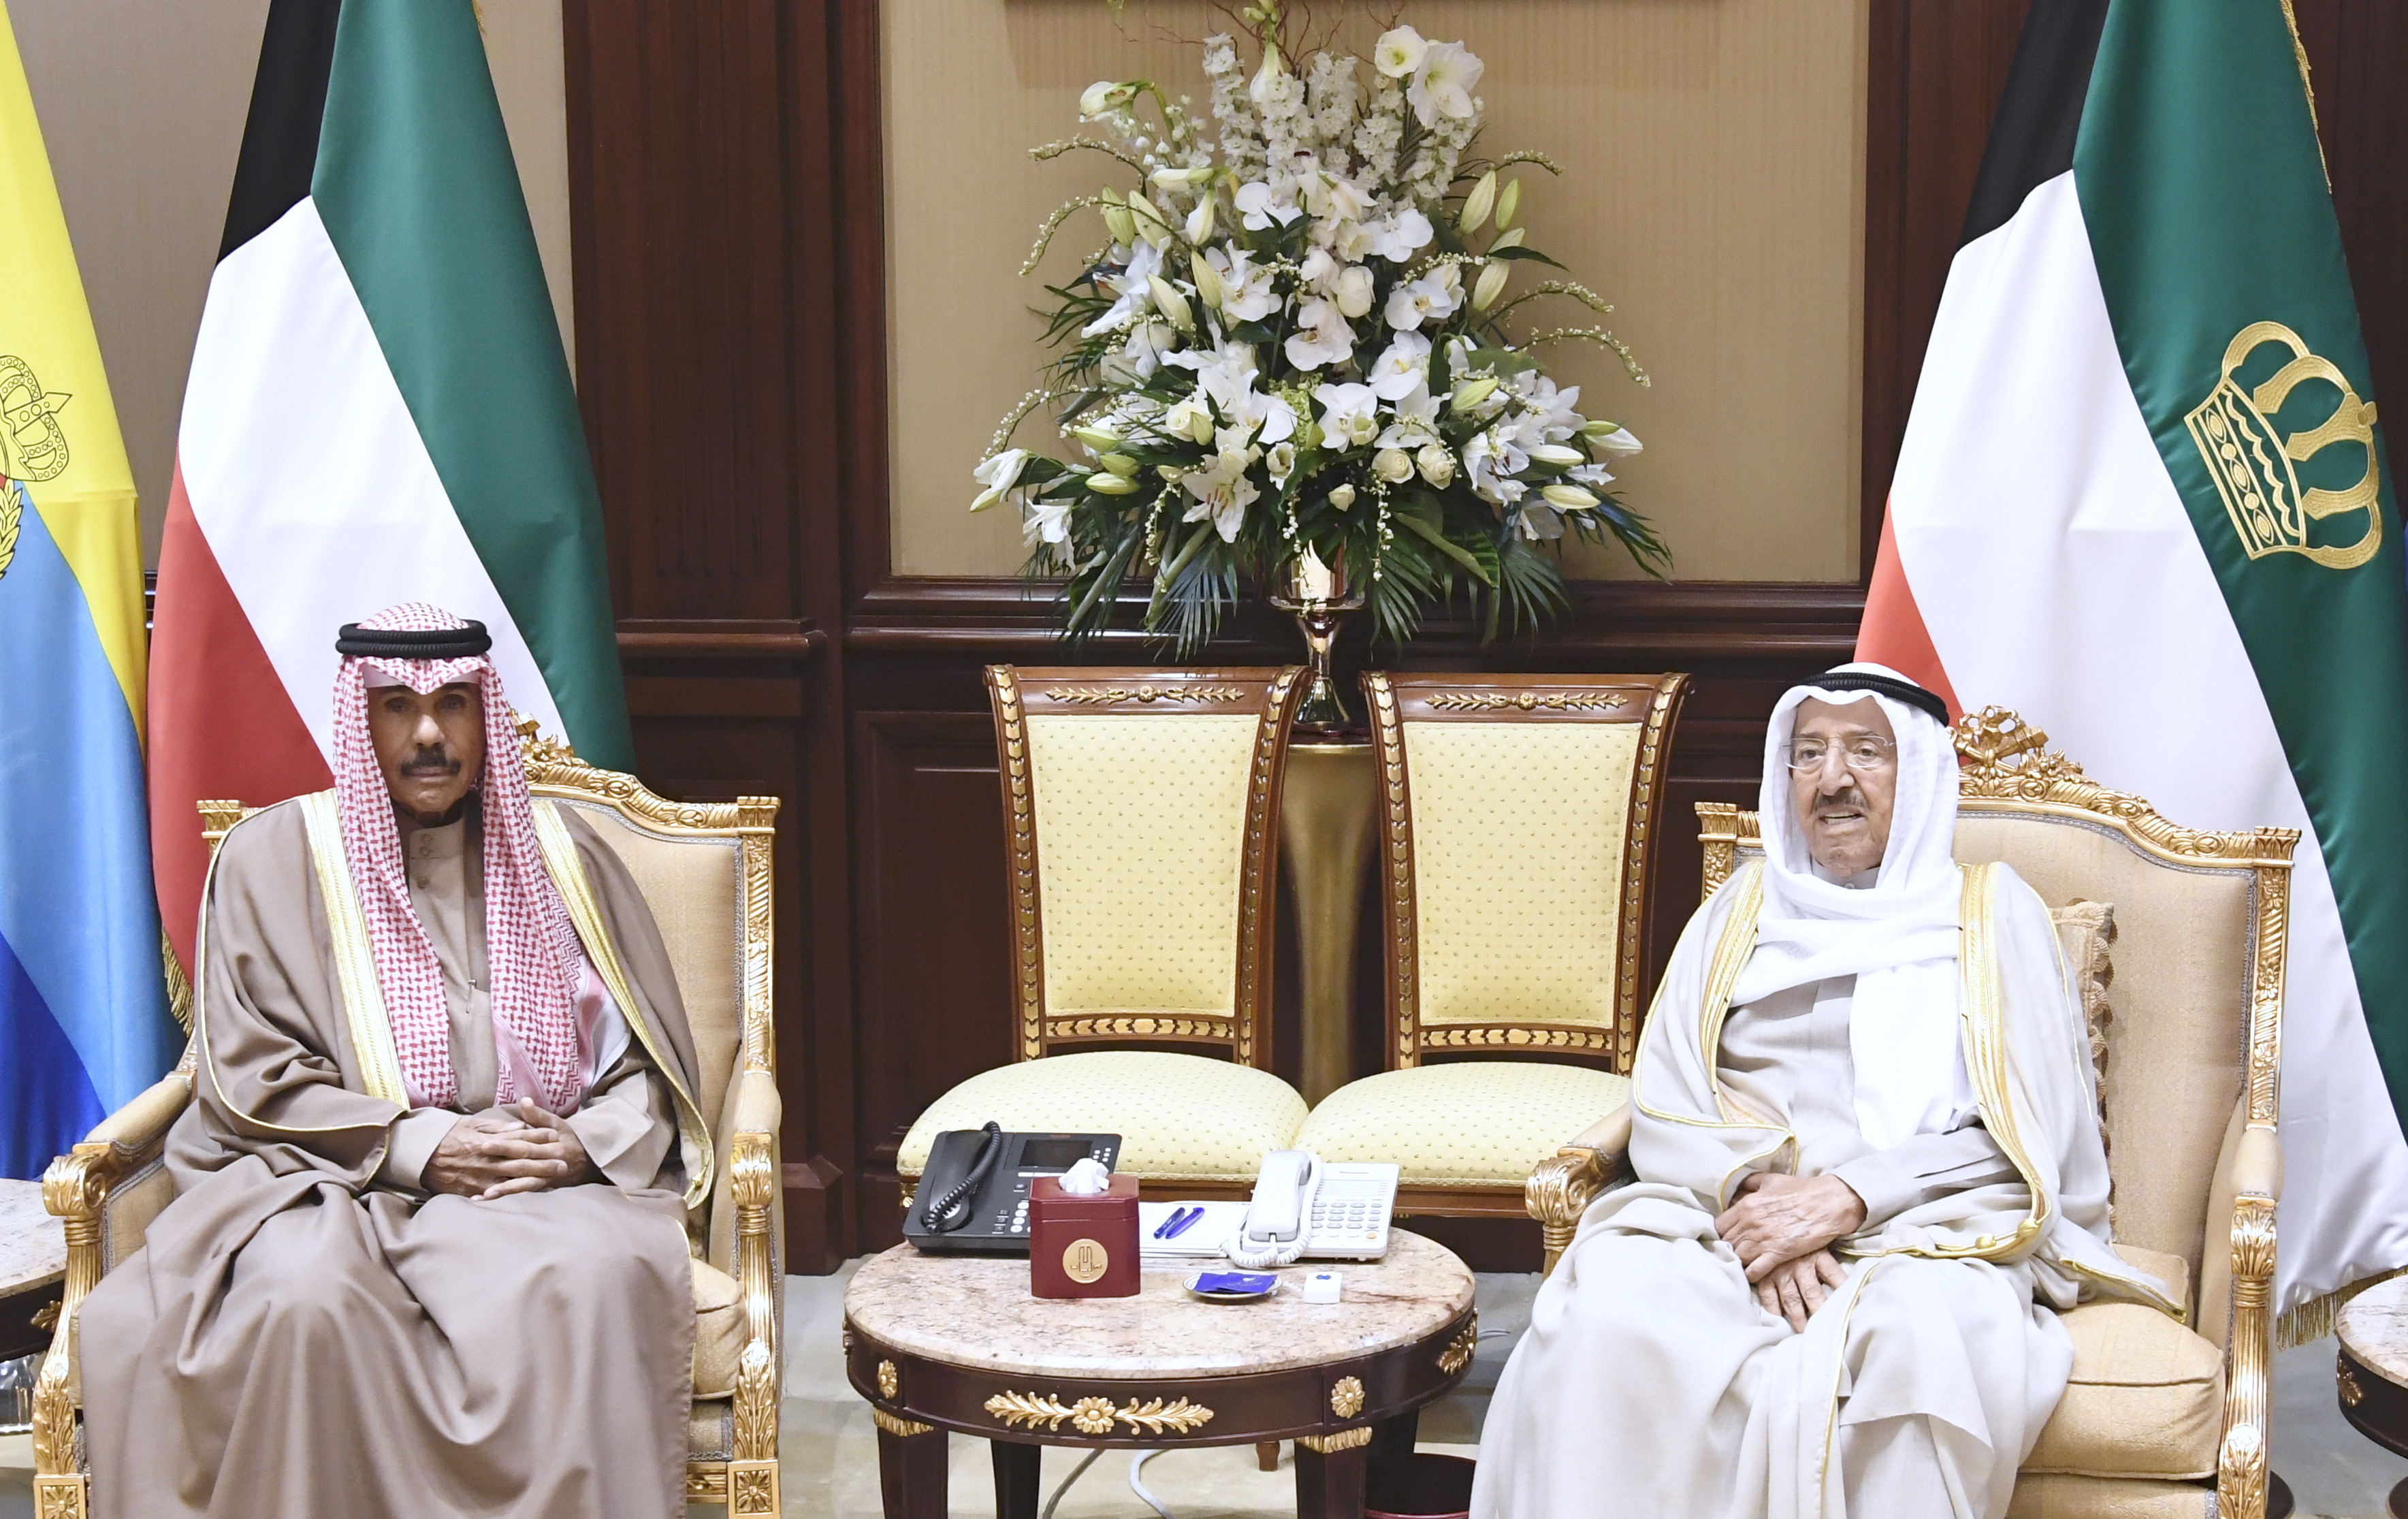 His Highness the Amir received His Highness the Crown Prince